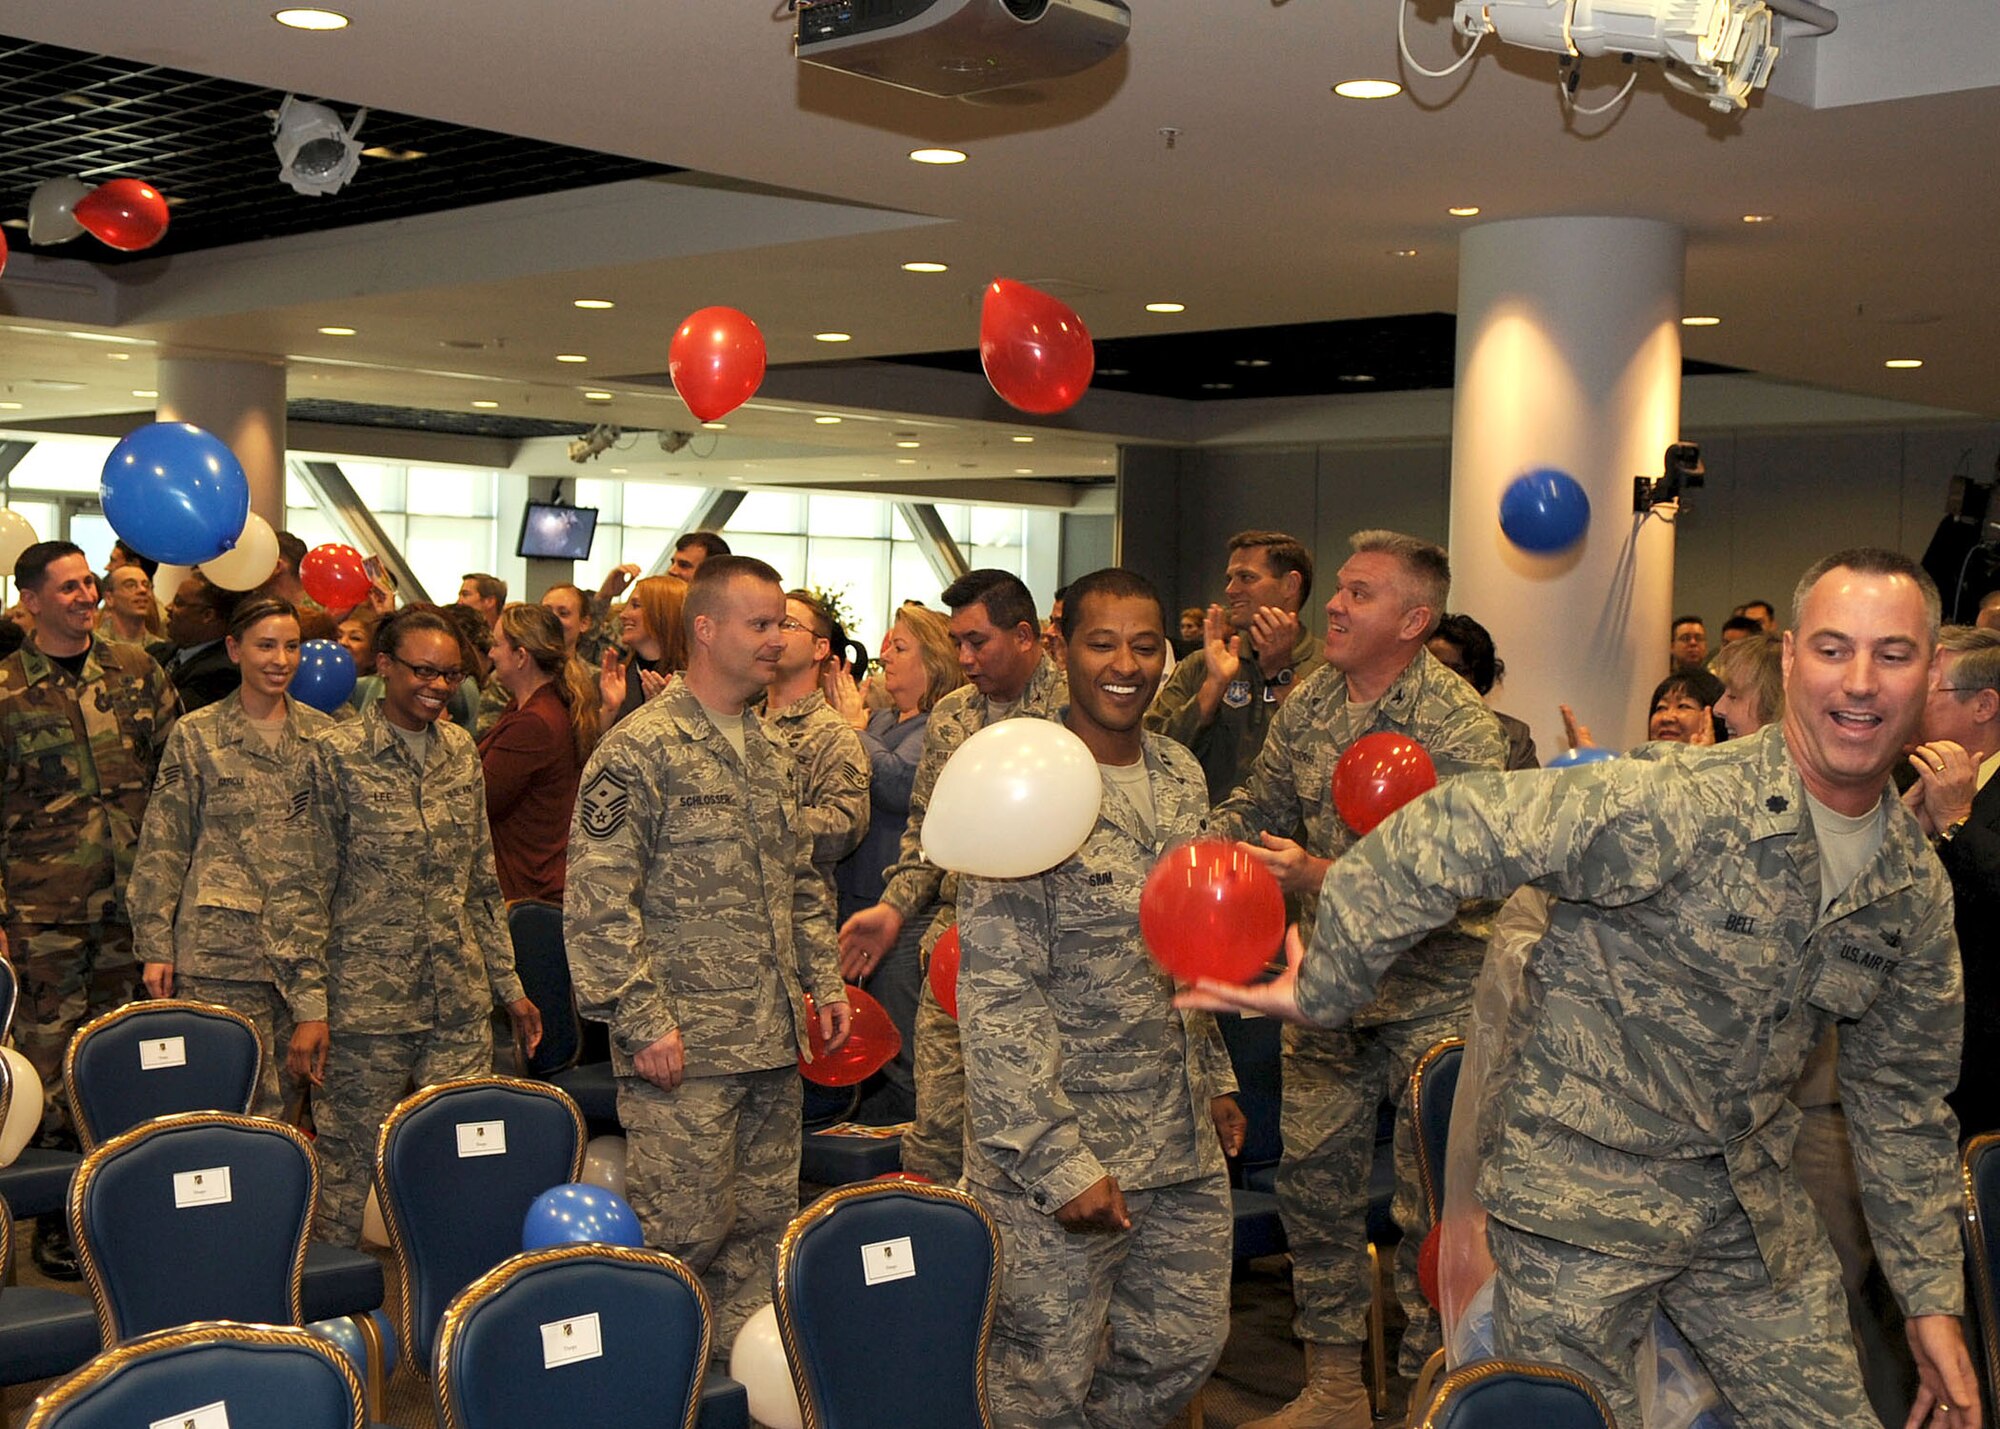 Los Angeles Air Force Base members, who recently returned from deployment, are welcomed with applause and balloons from the crowd inside Los Angeles AFB Gordon Conference Center at the start of the "SMC Welcome Home Airmen Celebration" ceremony, Jan. 29. (Photo by Stephen Schester)